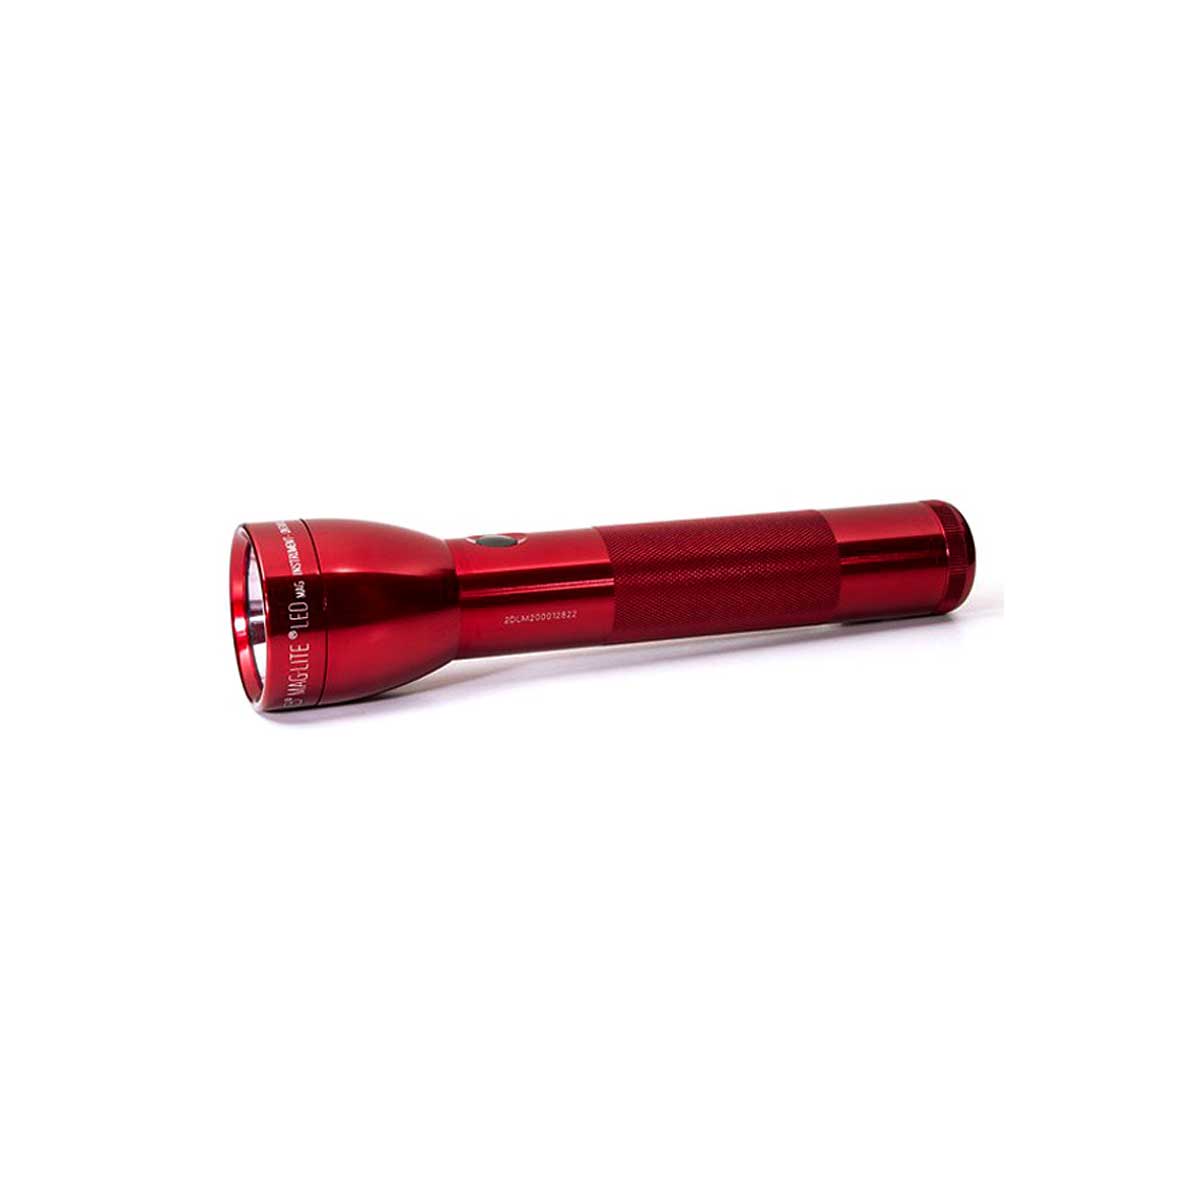 2 Cell D Maglite LED Flashlight (Red)